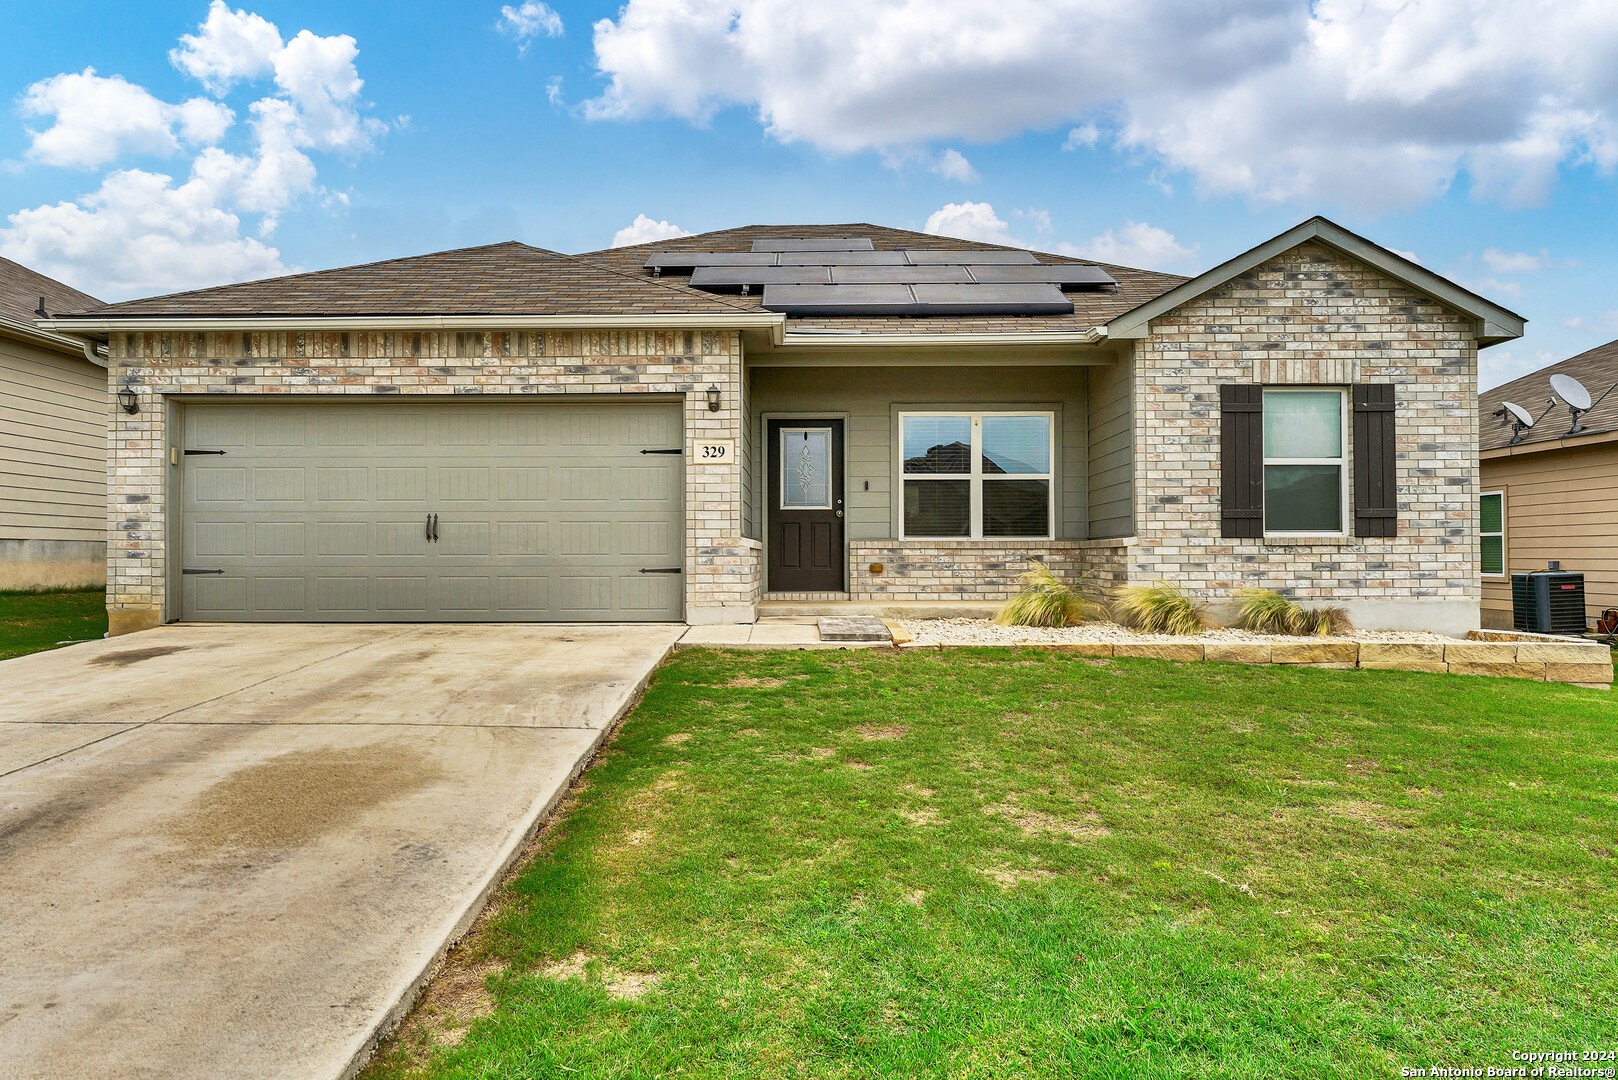 Photo of 329 Benelli Dr in New Braunfels, TX